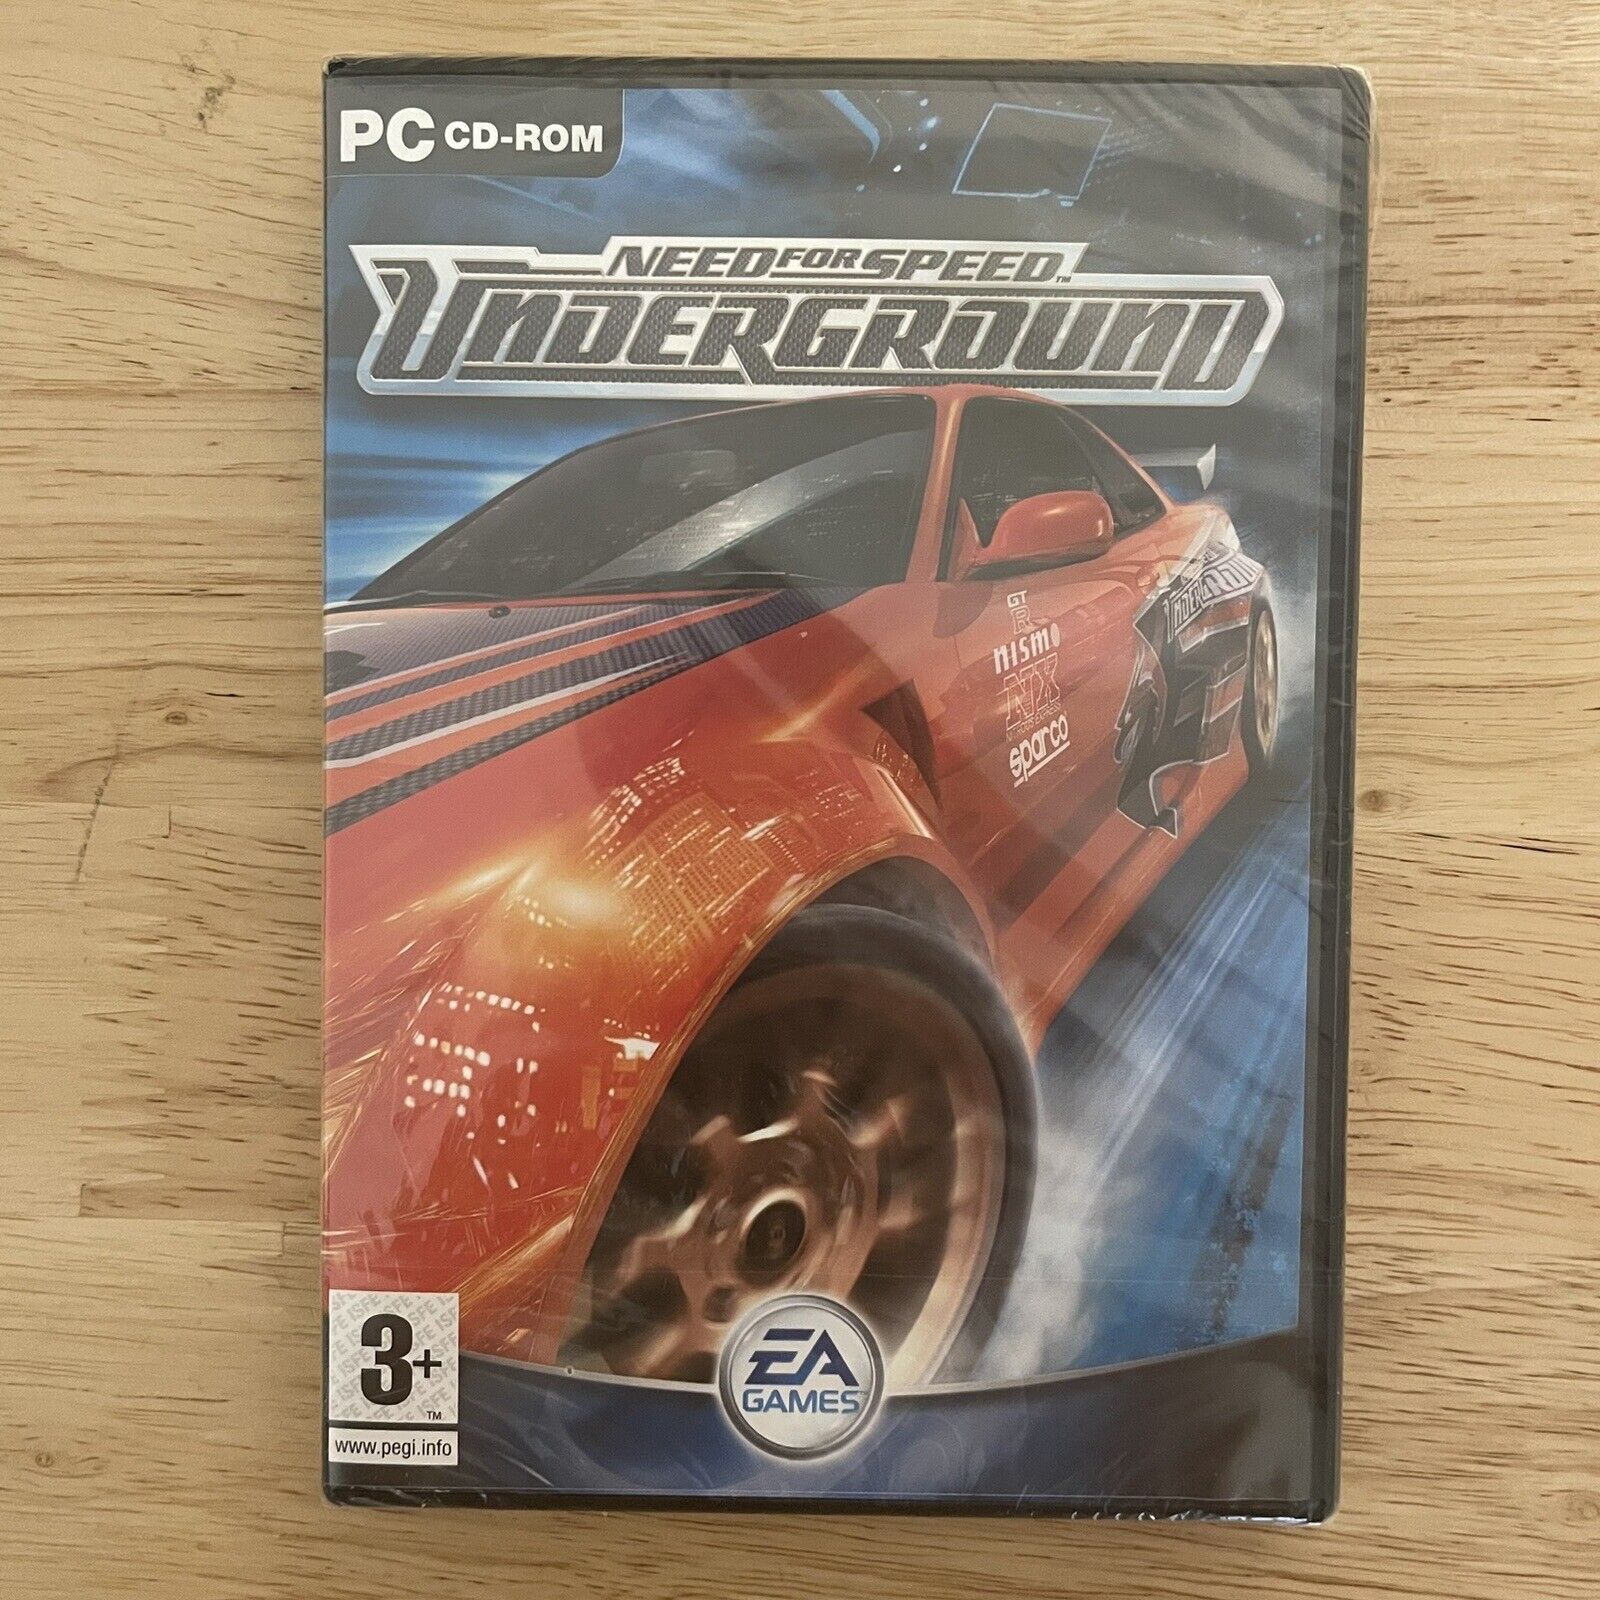 serial number need for speed underground 2 pc